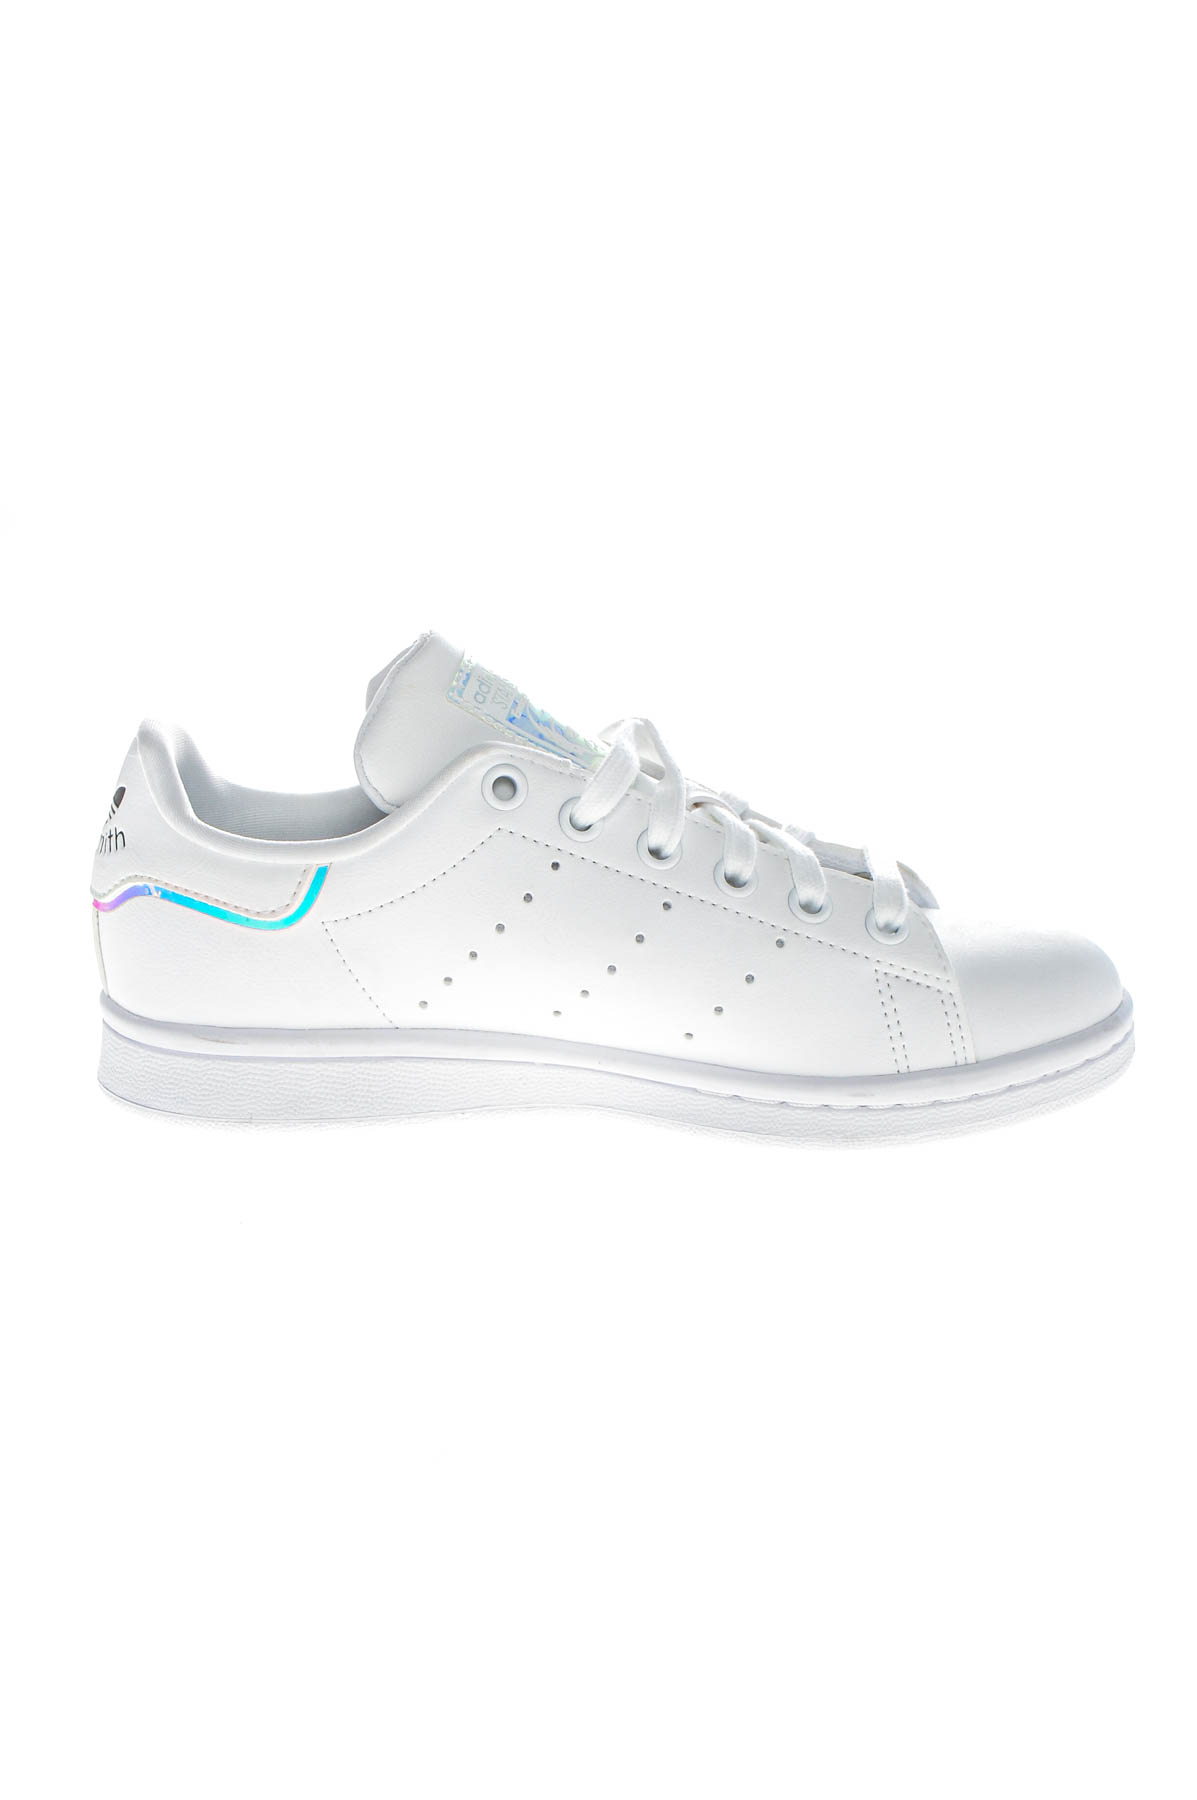 Girl's shoes - Stan Smith x Adidas - 2